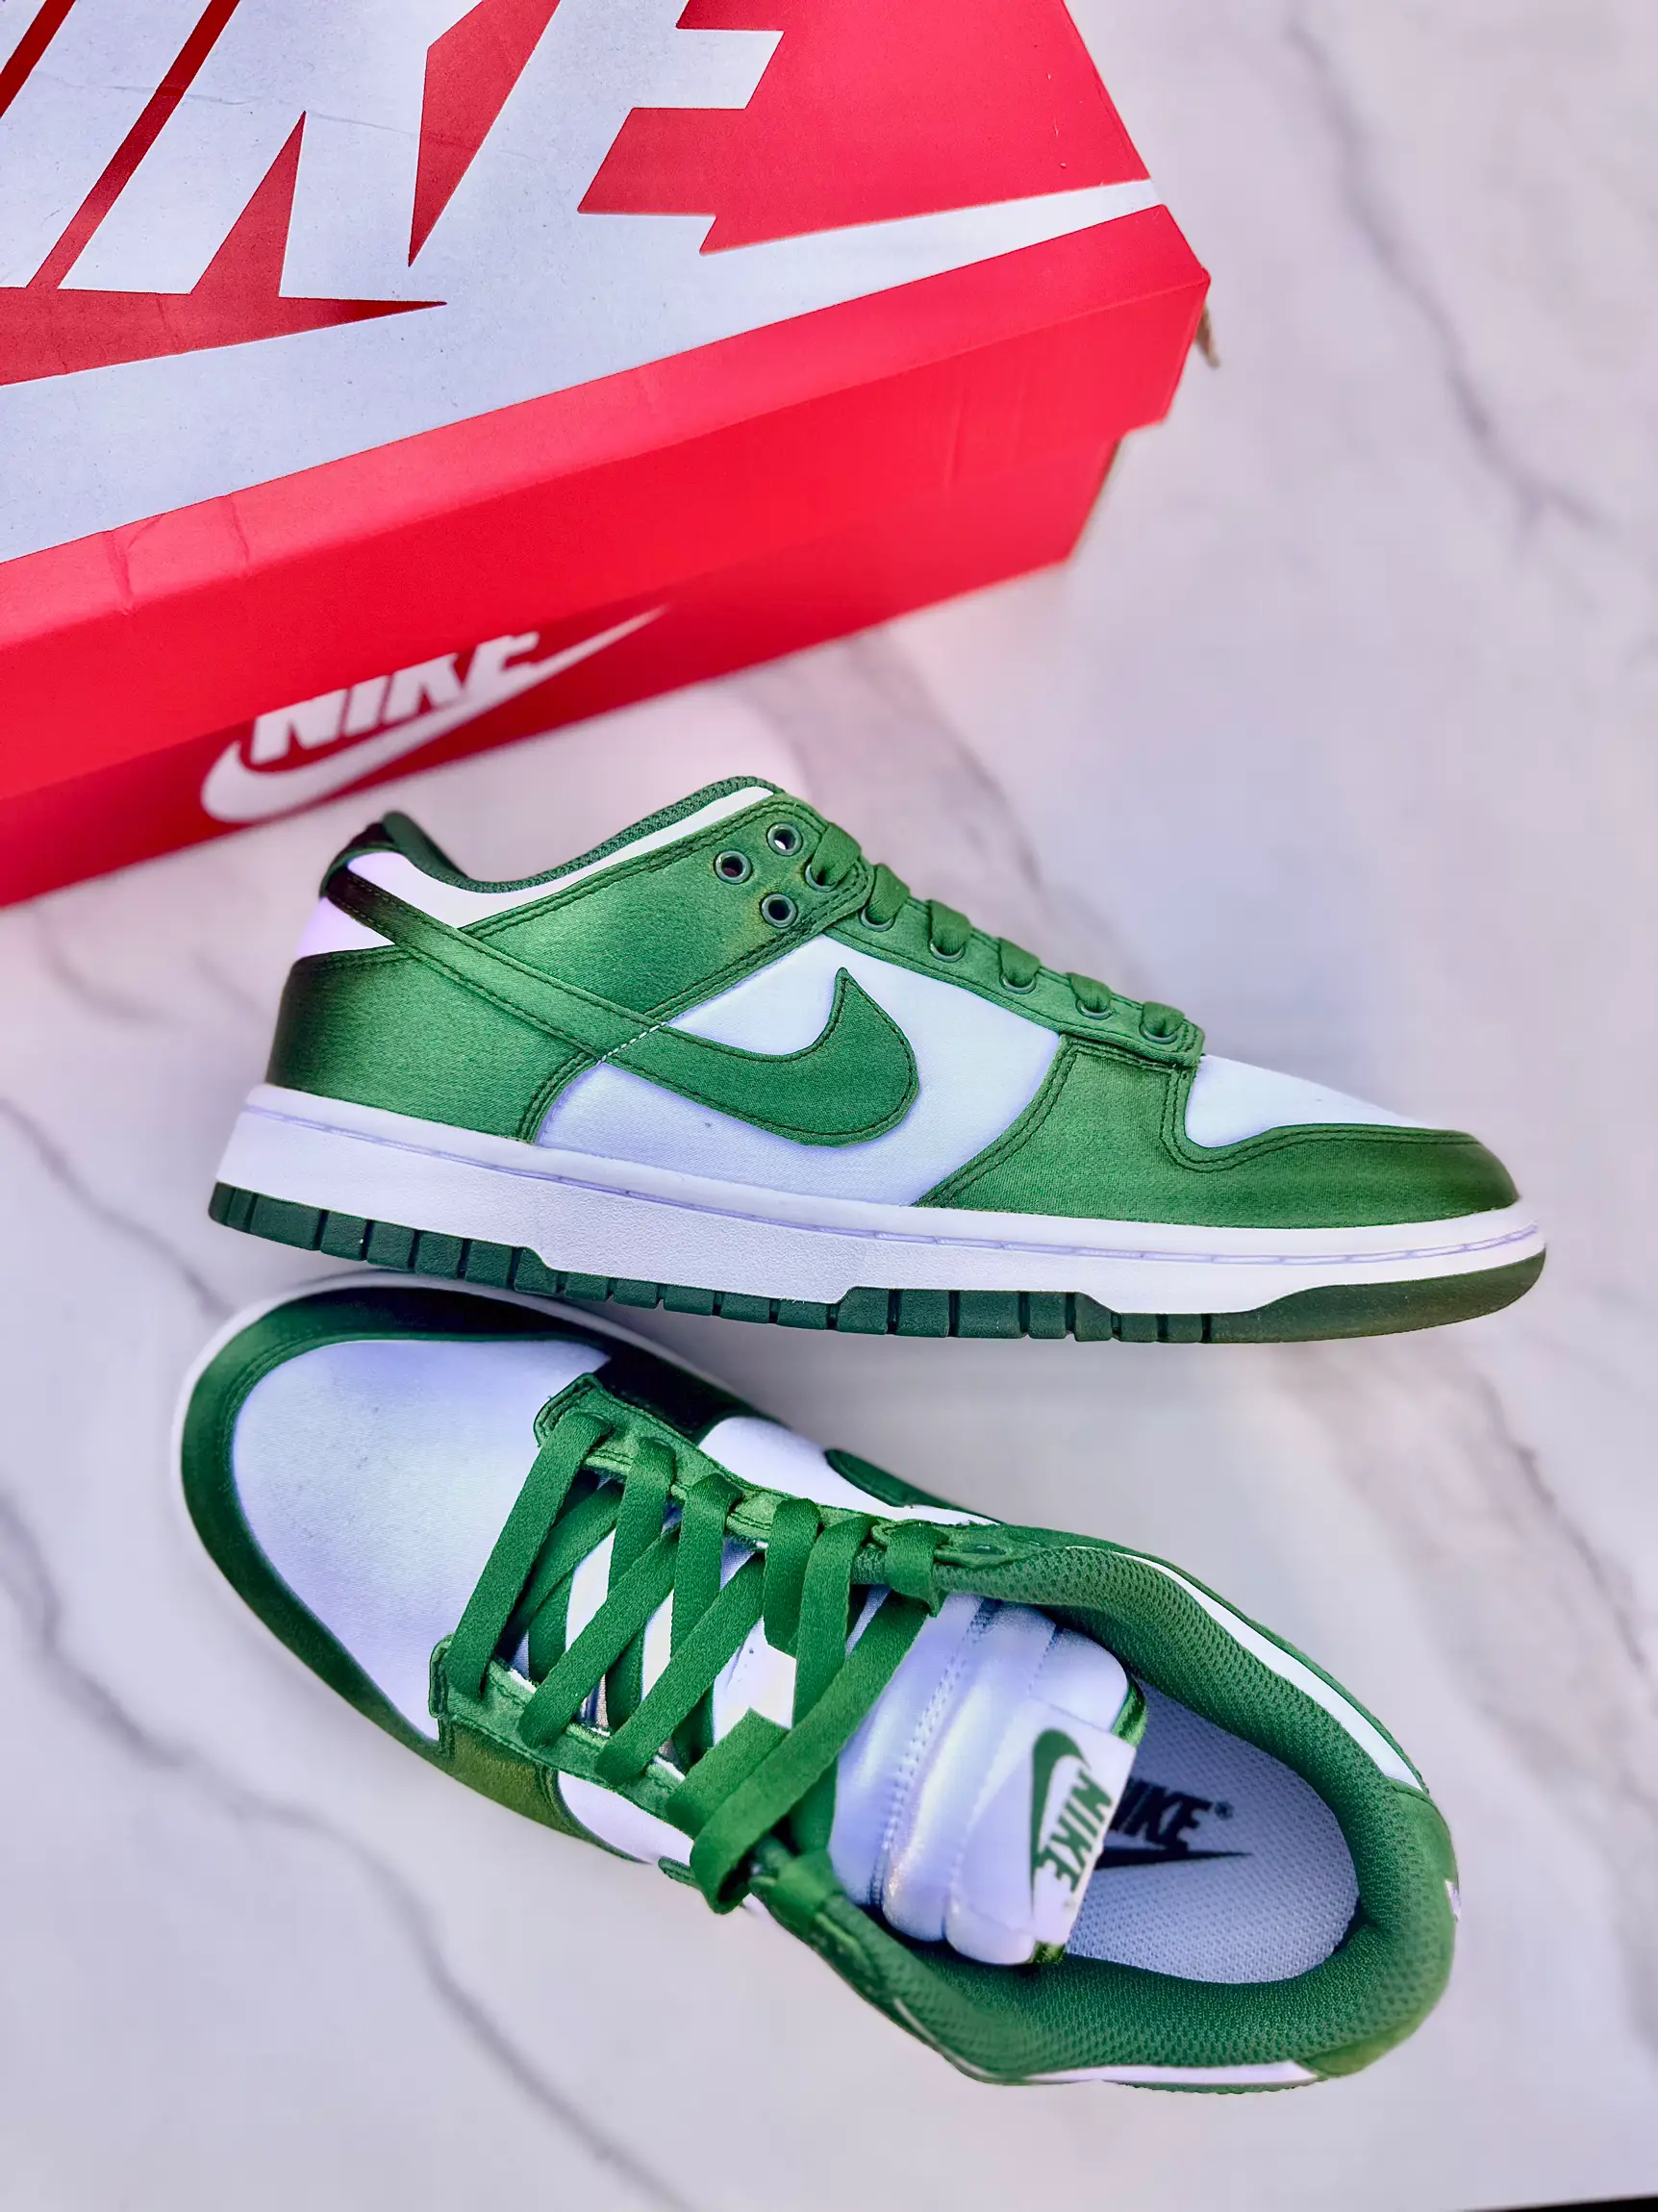 Unboxing the Satin Green Dunks WMNs👟💚   Gallery posted by